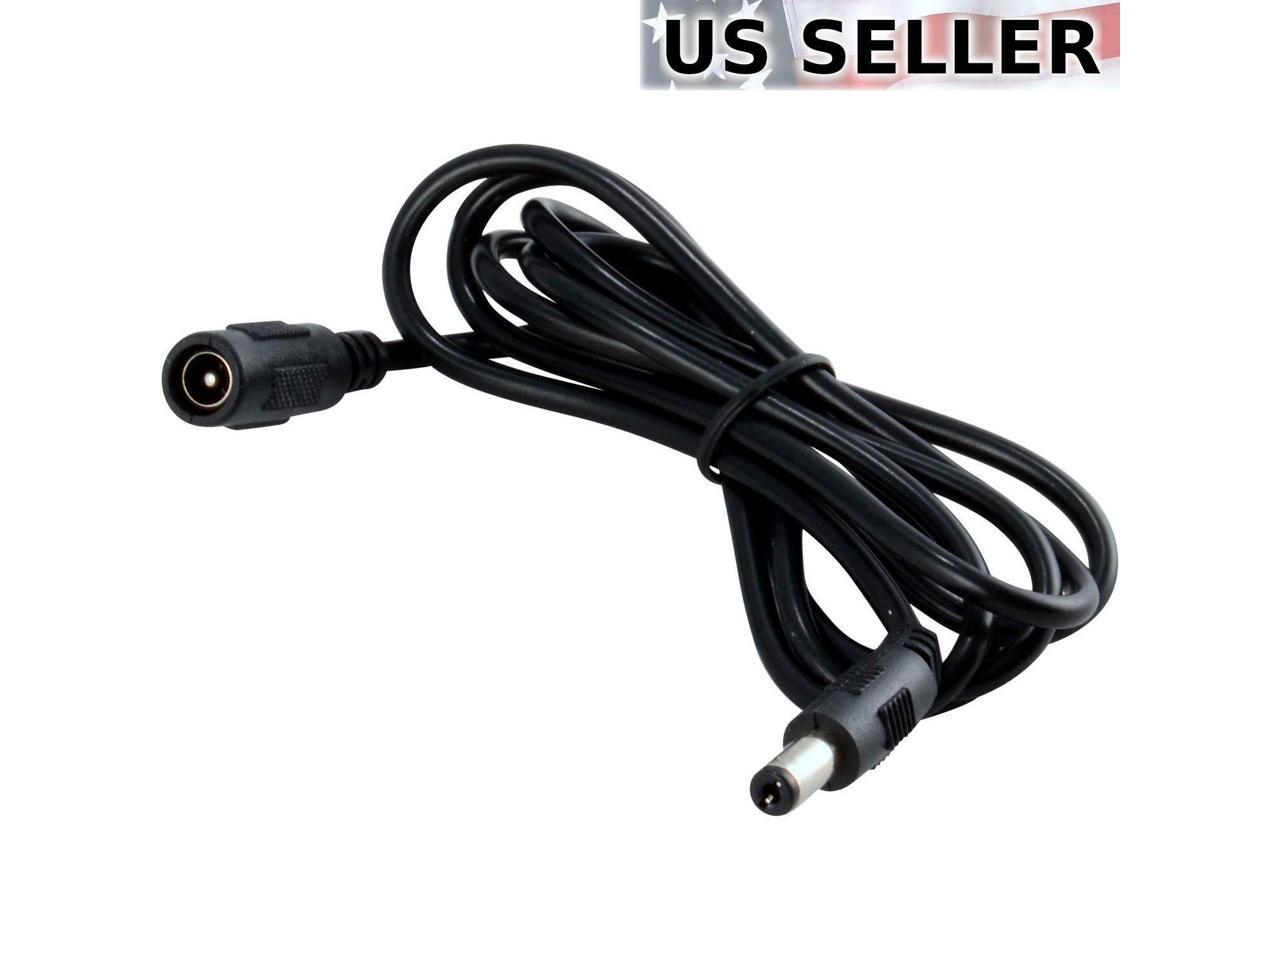 5ft DC Power Extension Cable Cord 5.5x2.1mm 5feet/1.5M for CCTV Camera DVR BLK 